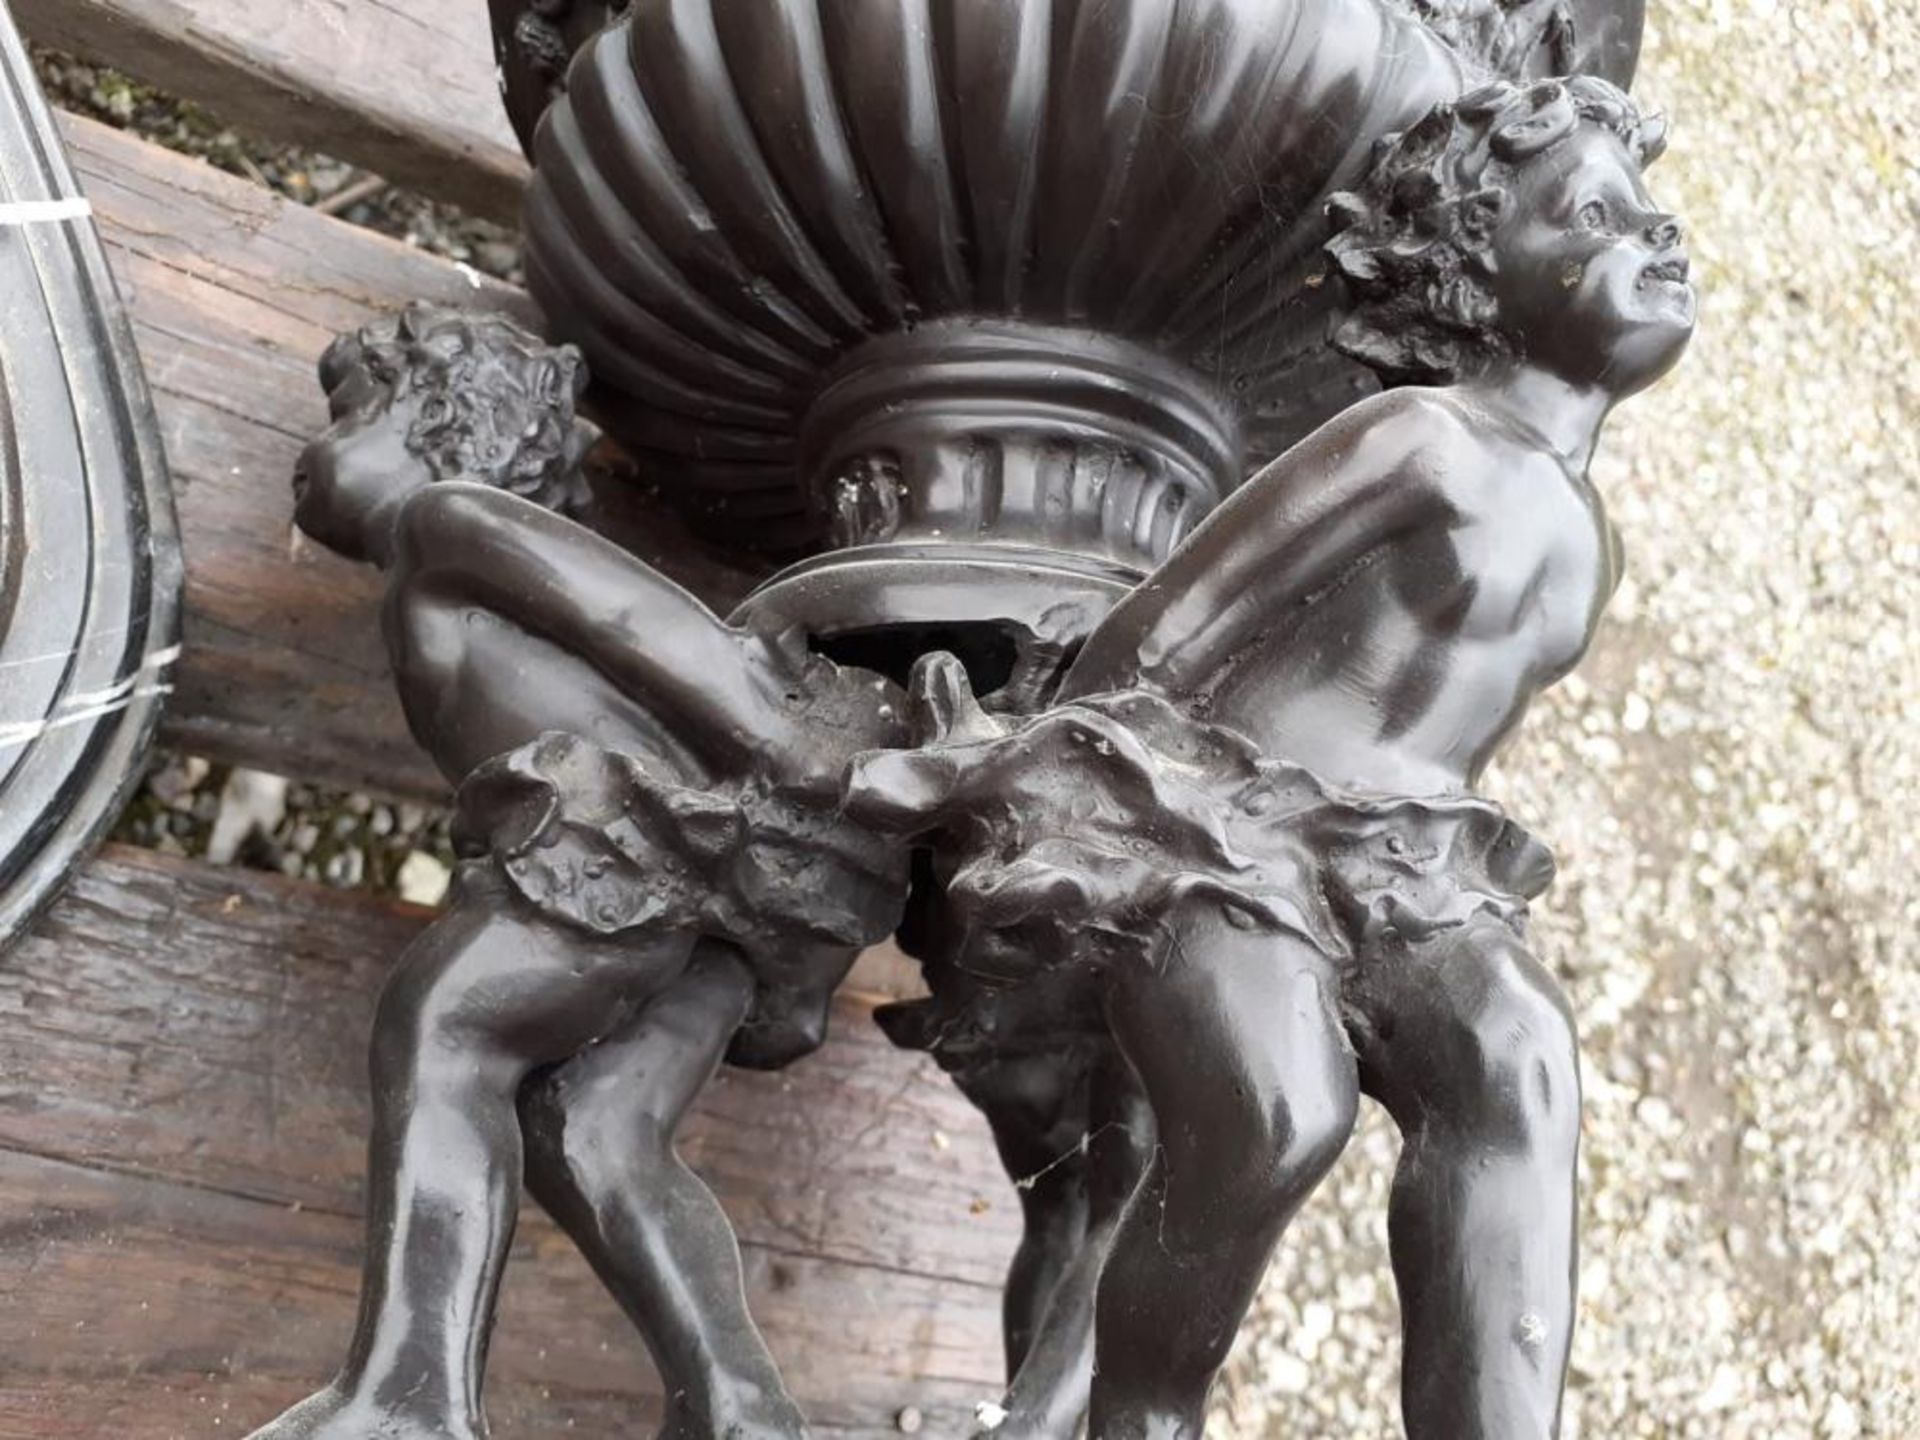 1 x Large Table Statue / Sculpture Of 3 Cherubs Carrying A Planter In Black Metal With Marble / Gran - Image 3 of 10